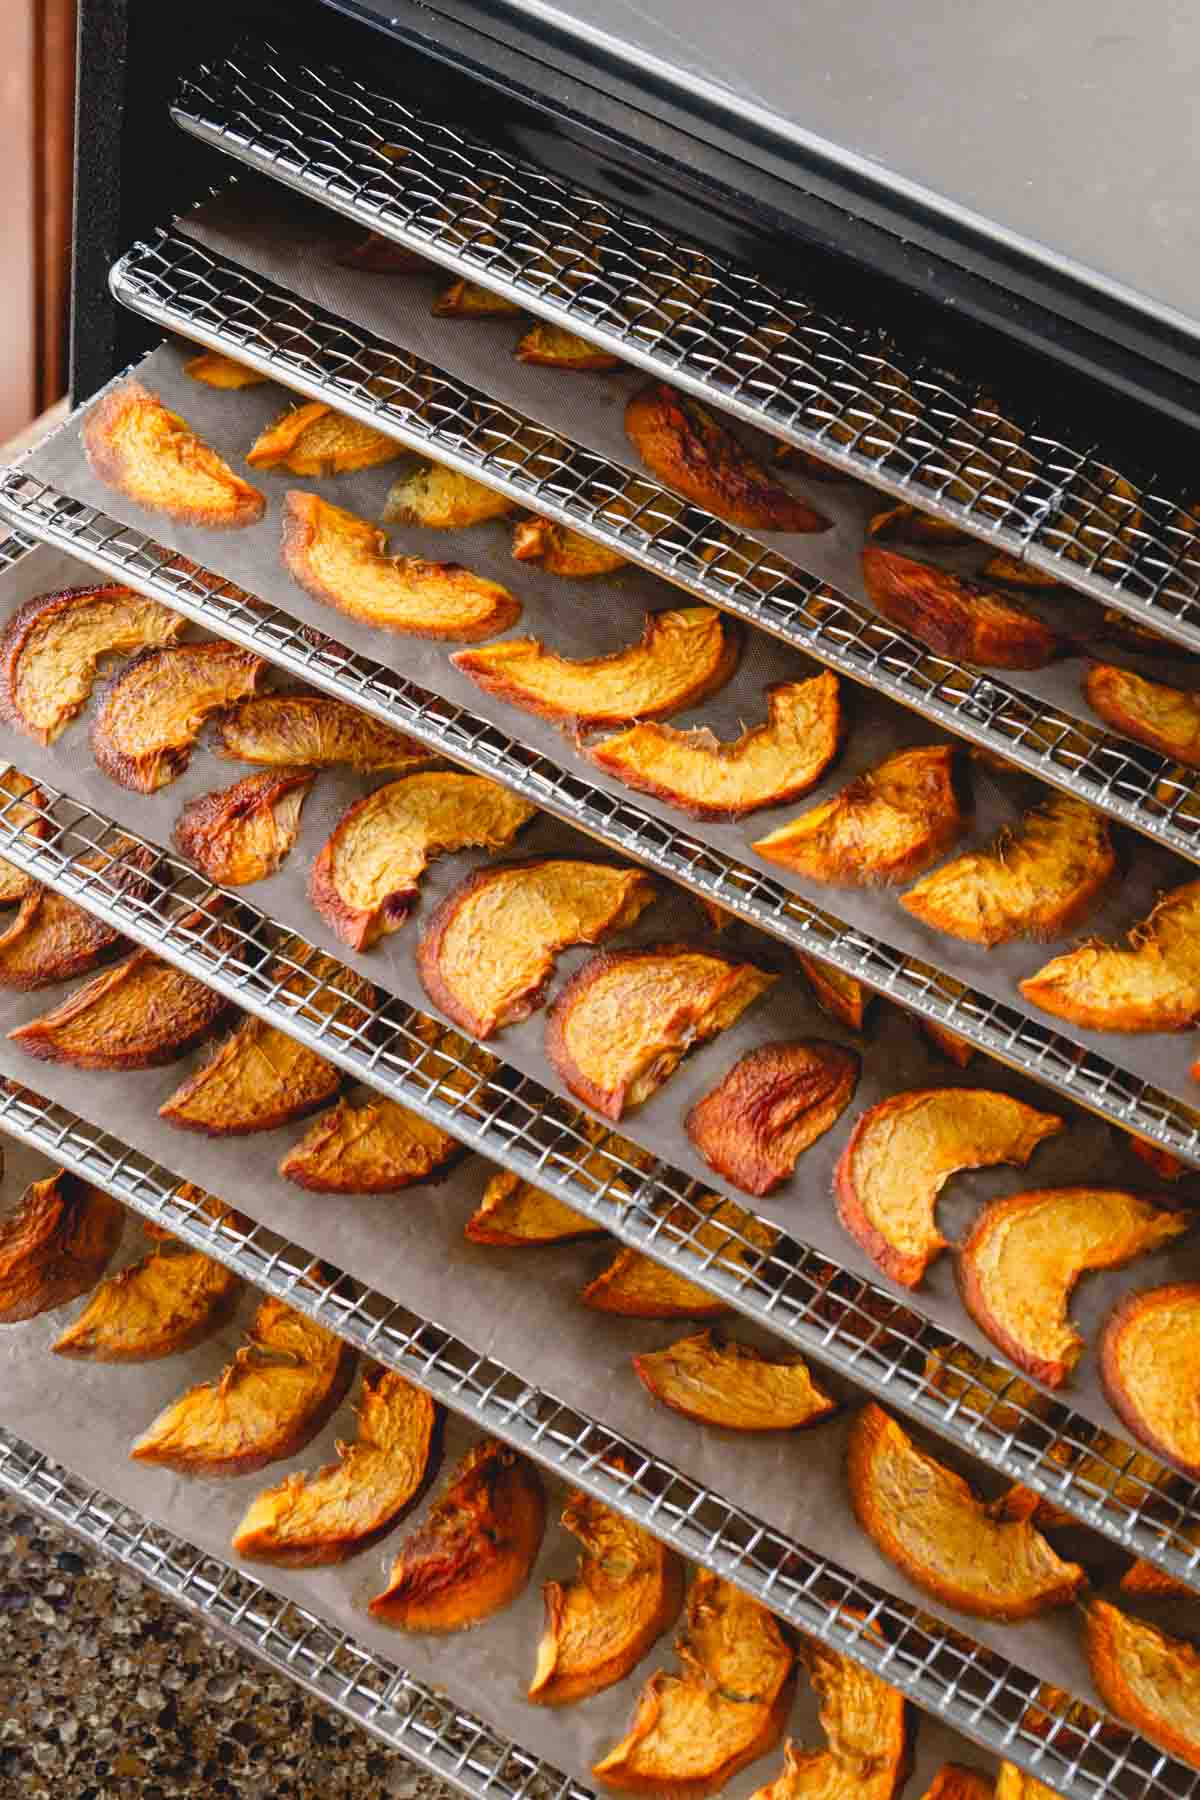 A dehydrator with five sheets of dehydrated peaches sticking out.